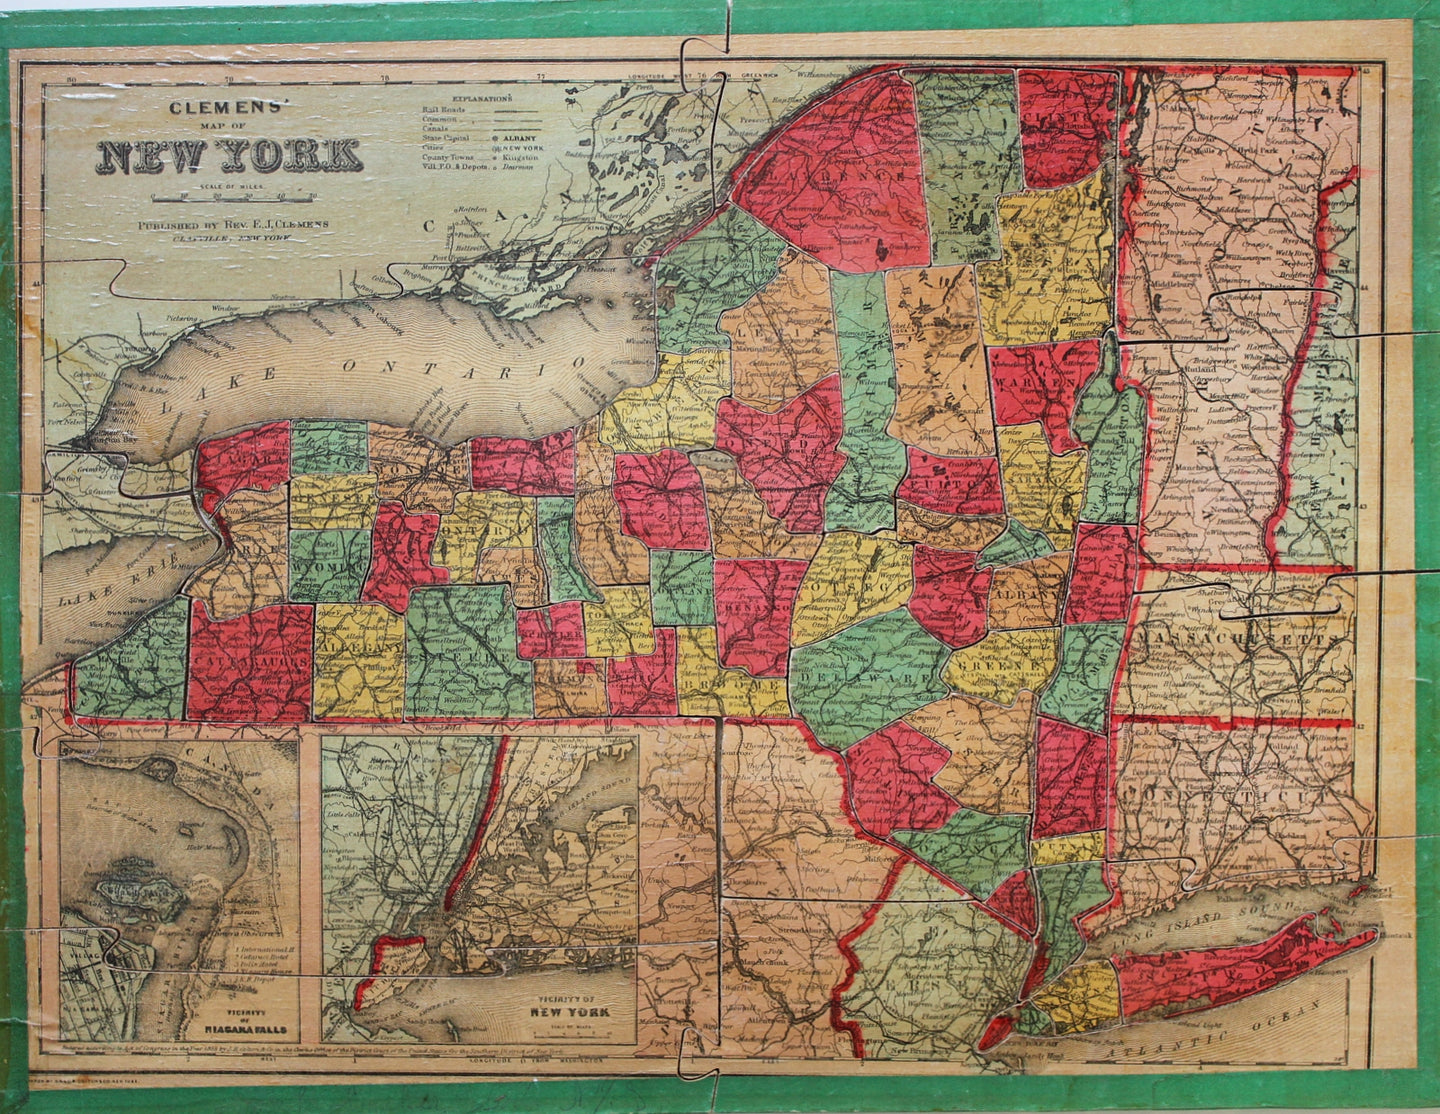 Antique-Jigsaw-Puzzle-Map-Clemens'-Silent-Teacher-Dissected-Map-of-the-United-States-and-of-Each-State-in-Counties-United-States-General-New-York-1880-Rev.-E.J.-Clemens-Maps-Of-Antiquity